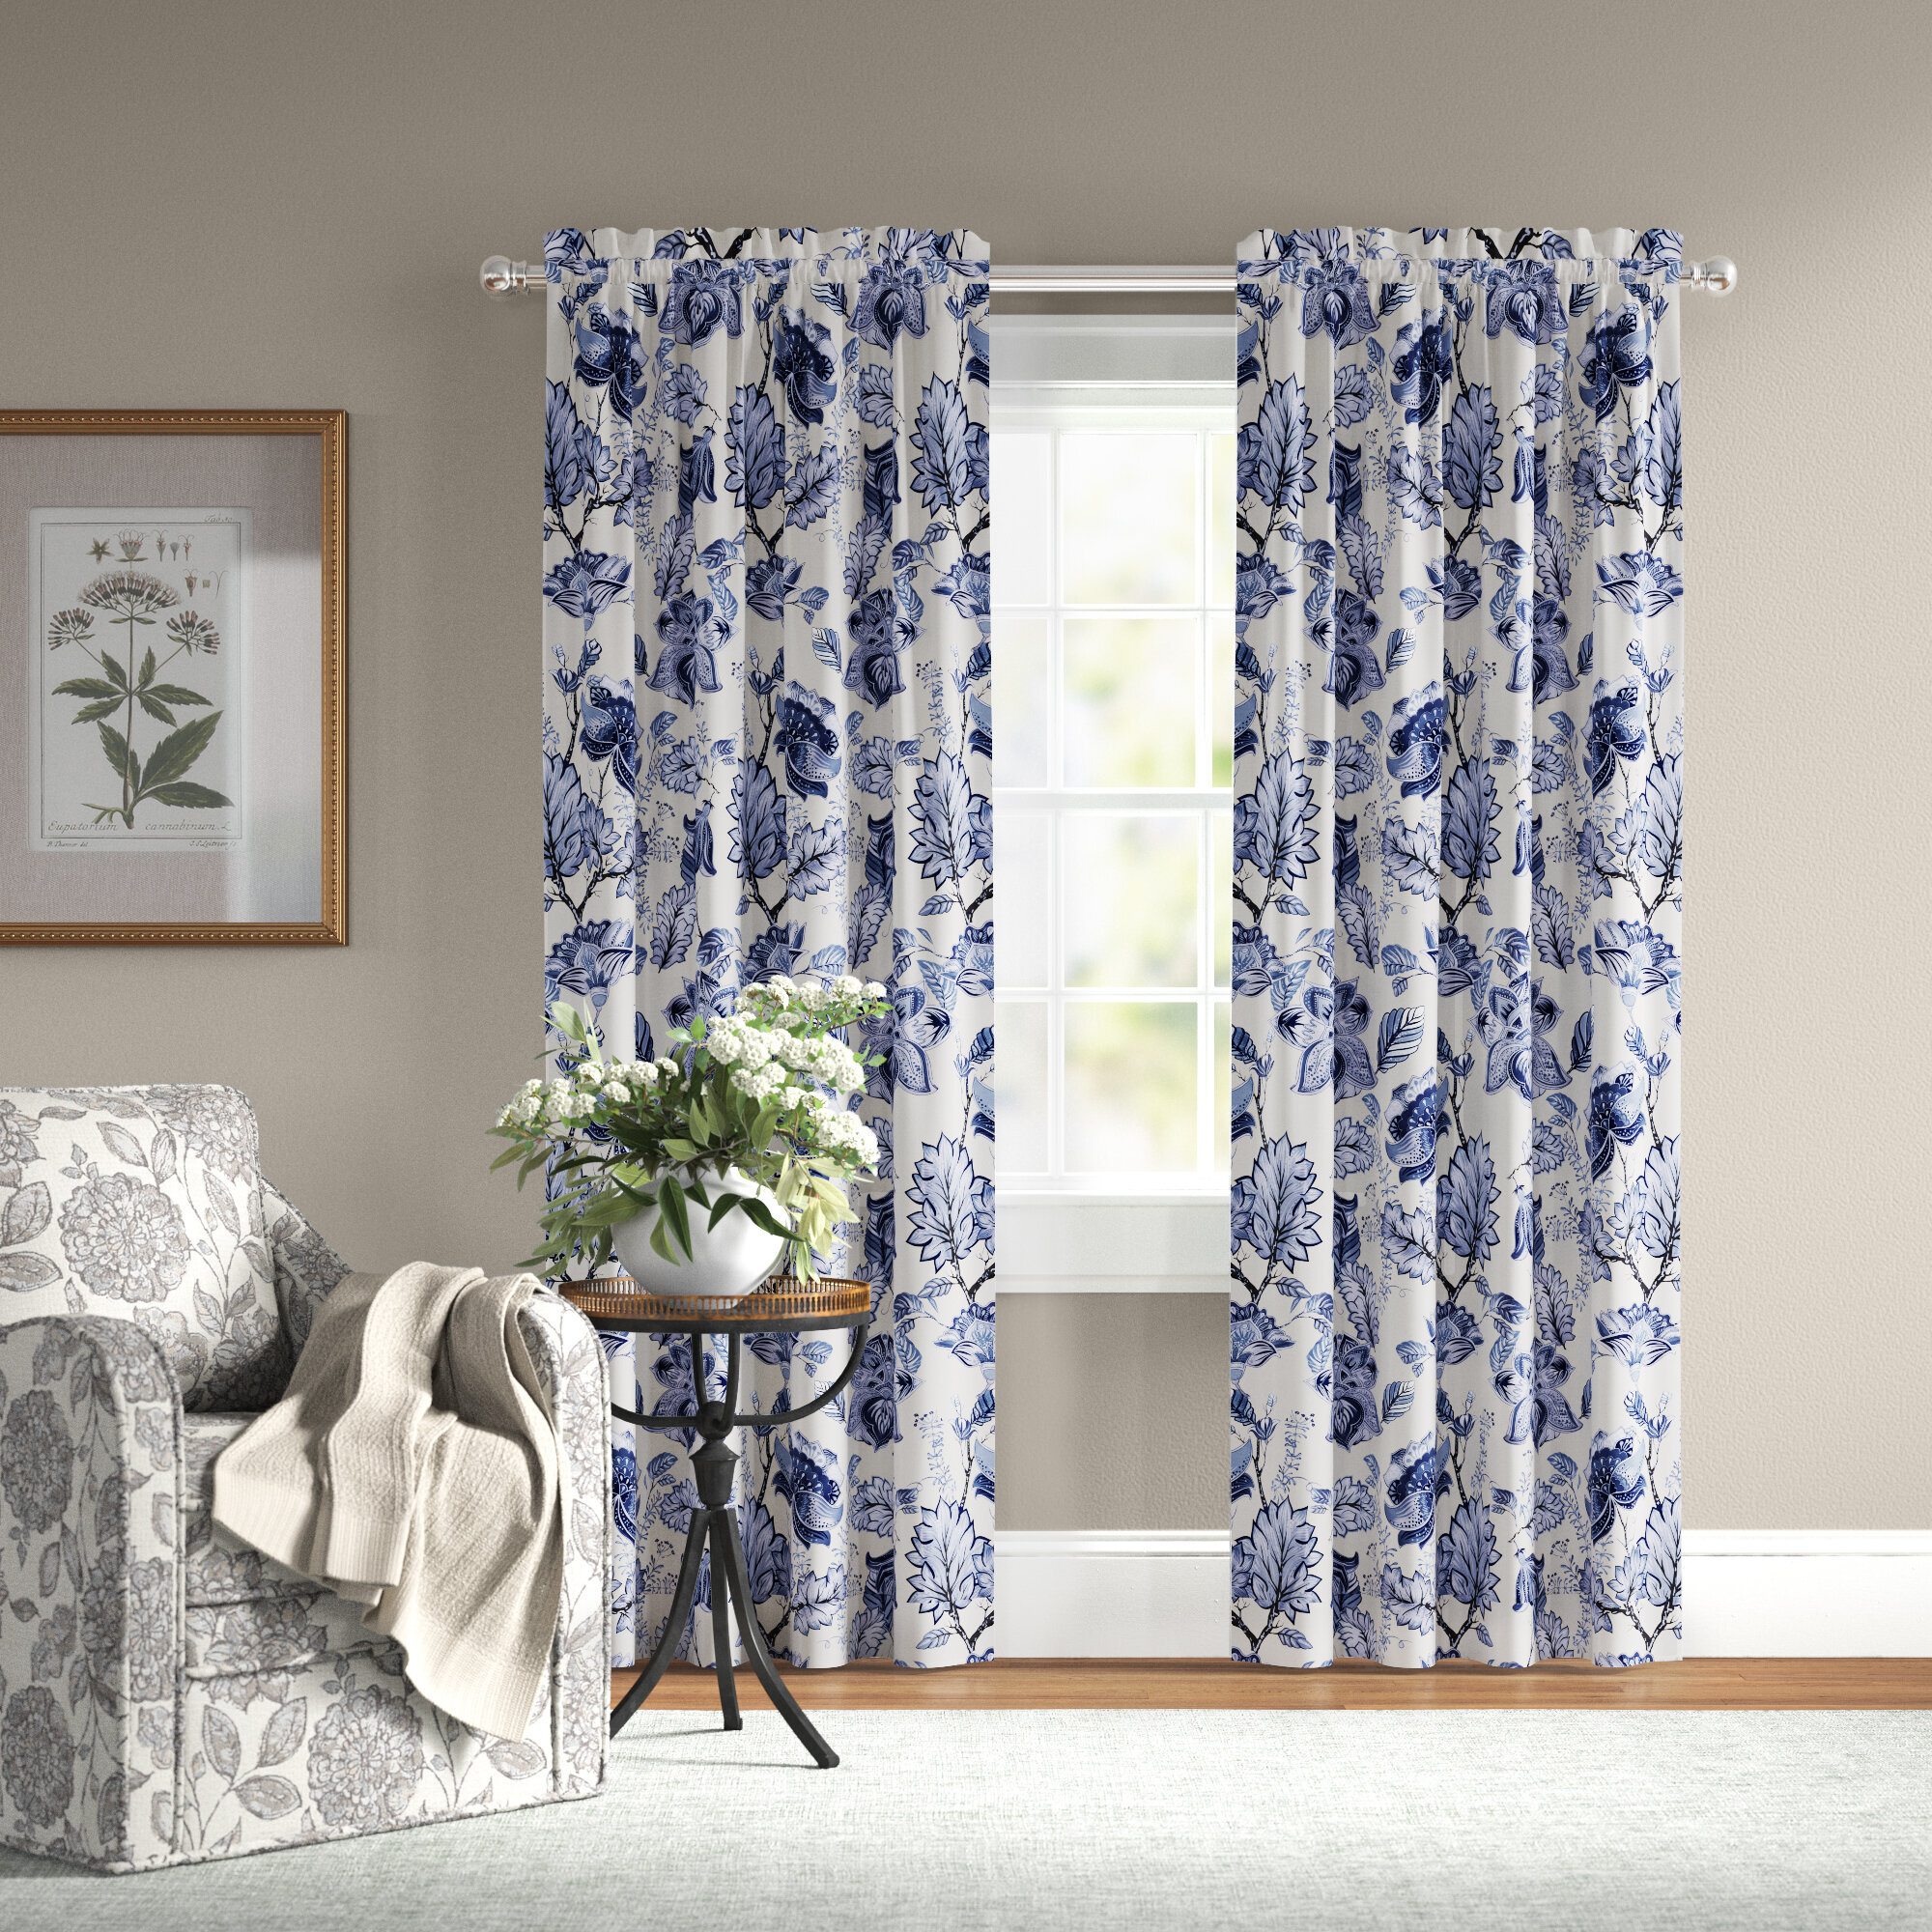 Wayfair | Darby Home Co Curtains & Drapes You'll Love in 2022